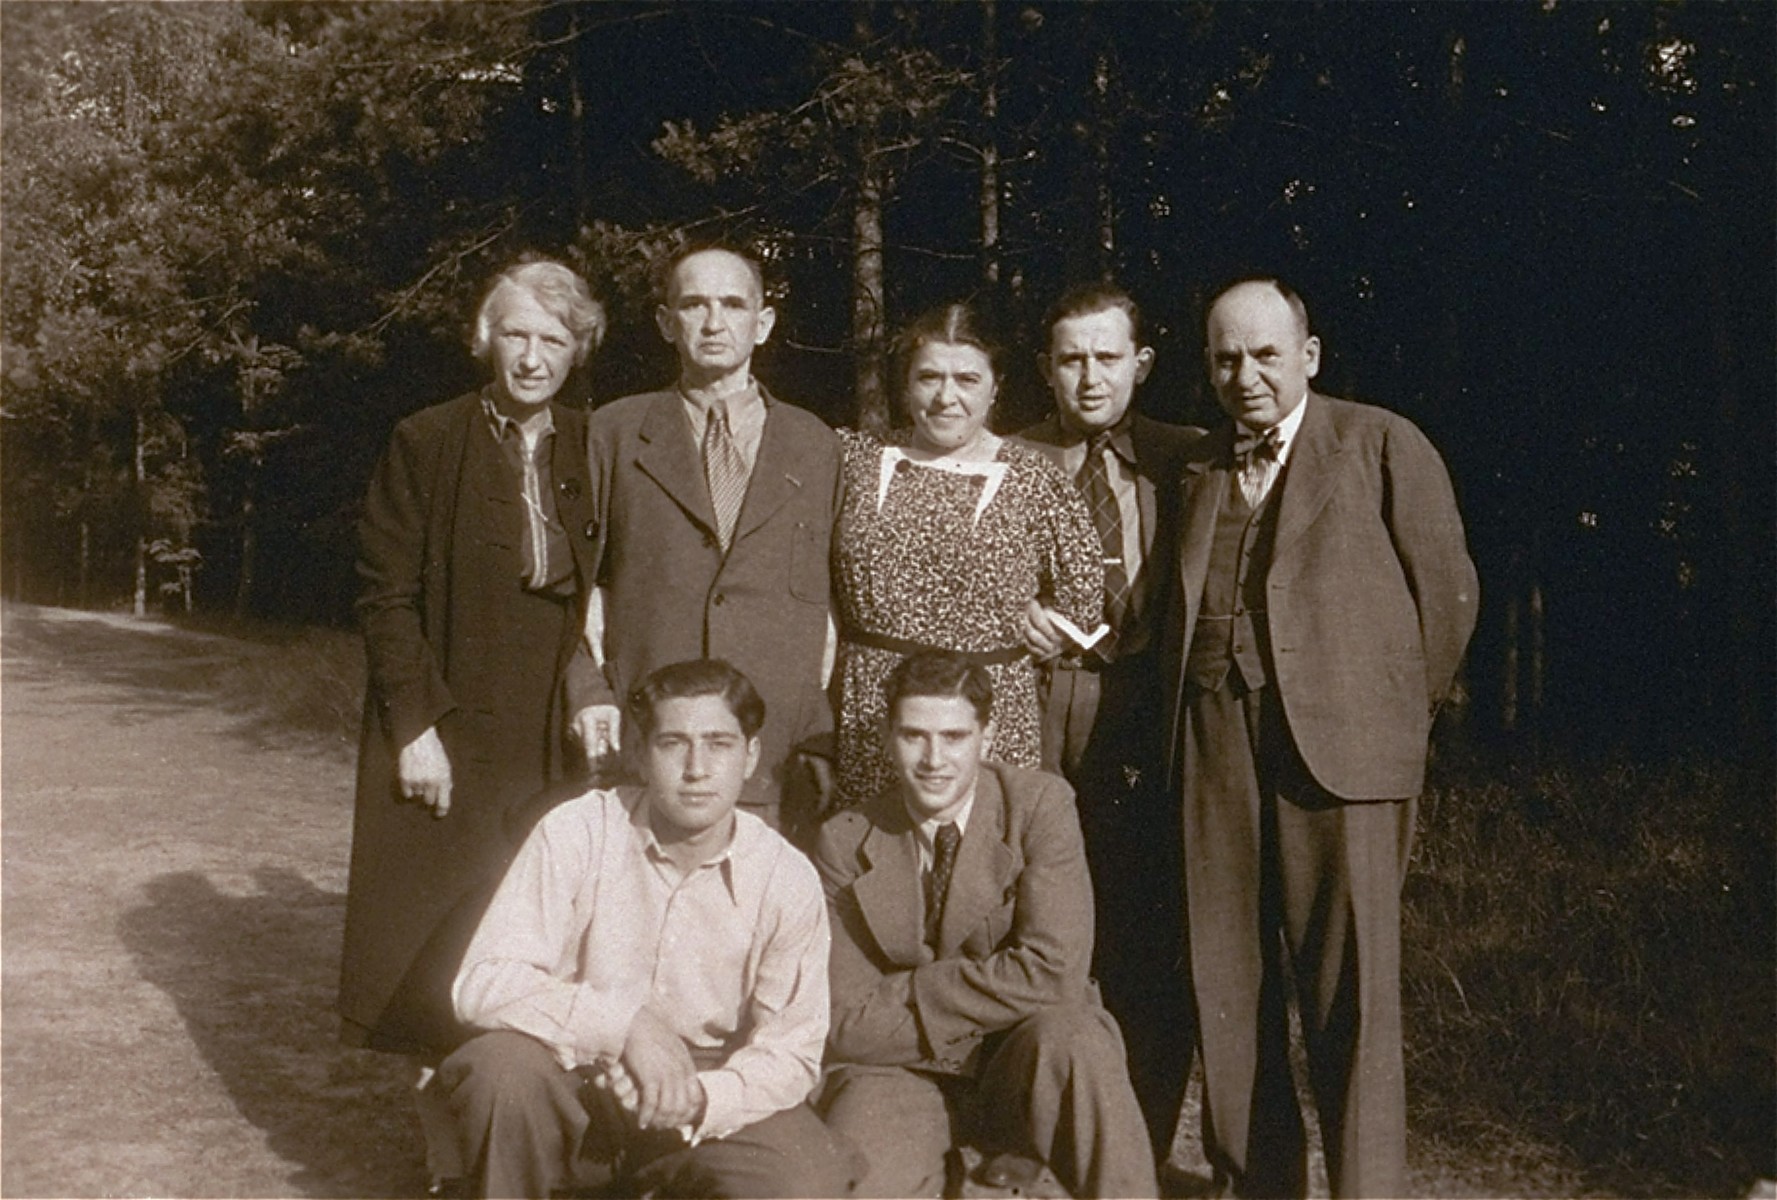 Group portrait of an extended German-Jewish family on an outing in Tiergarten in Berlin.  

Among those pictured are Elsa, Carl and Peter Victor.